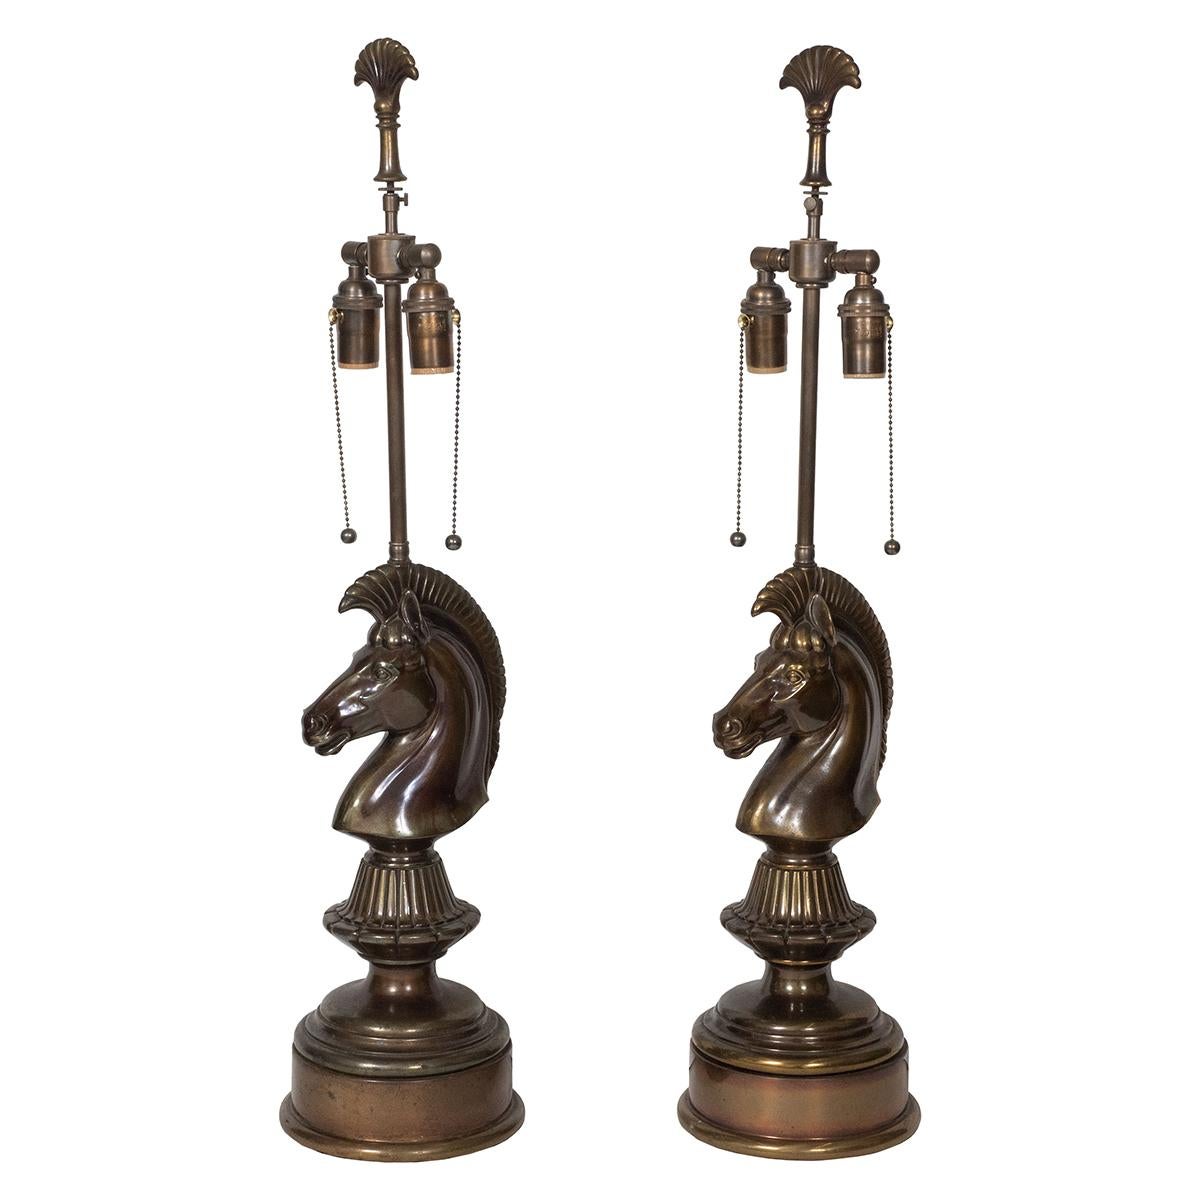 Pair of patinated bronze lamps with chess piece knight (horse) design.